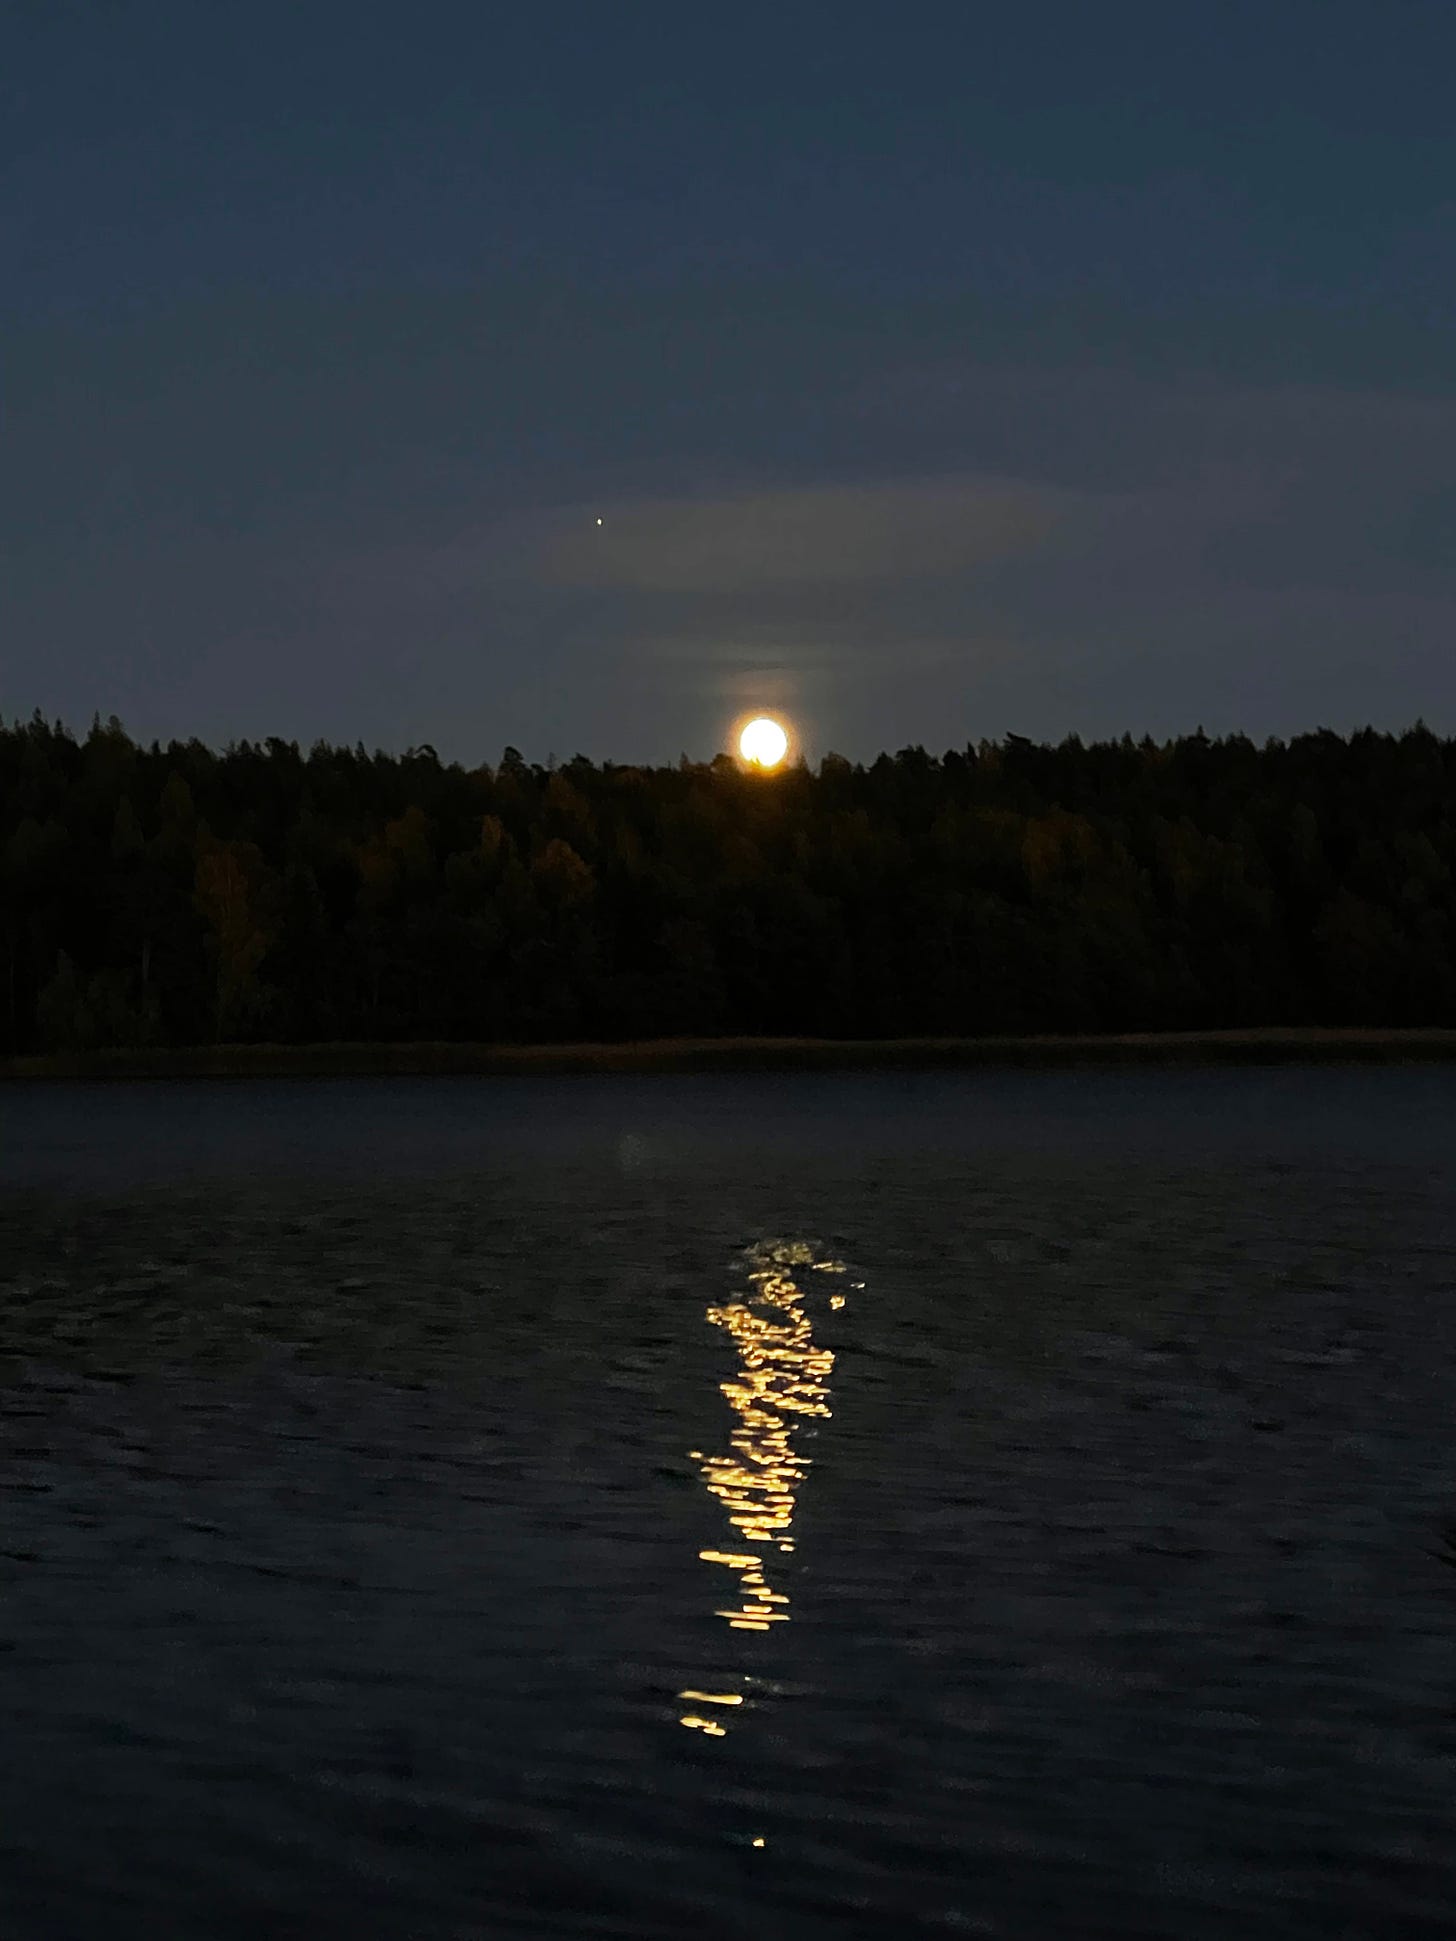 glowing moon rising above a forest lined horizon with the moonlight reflected on the water in the foreground